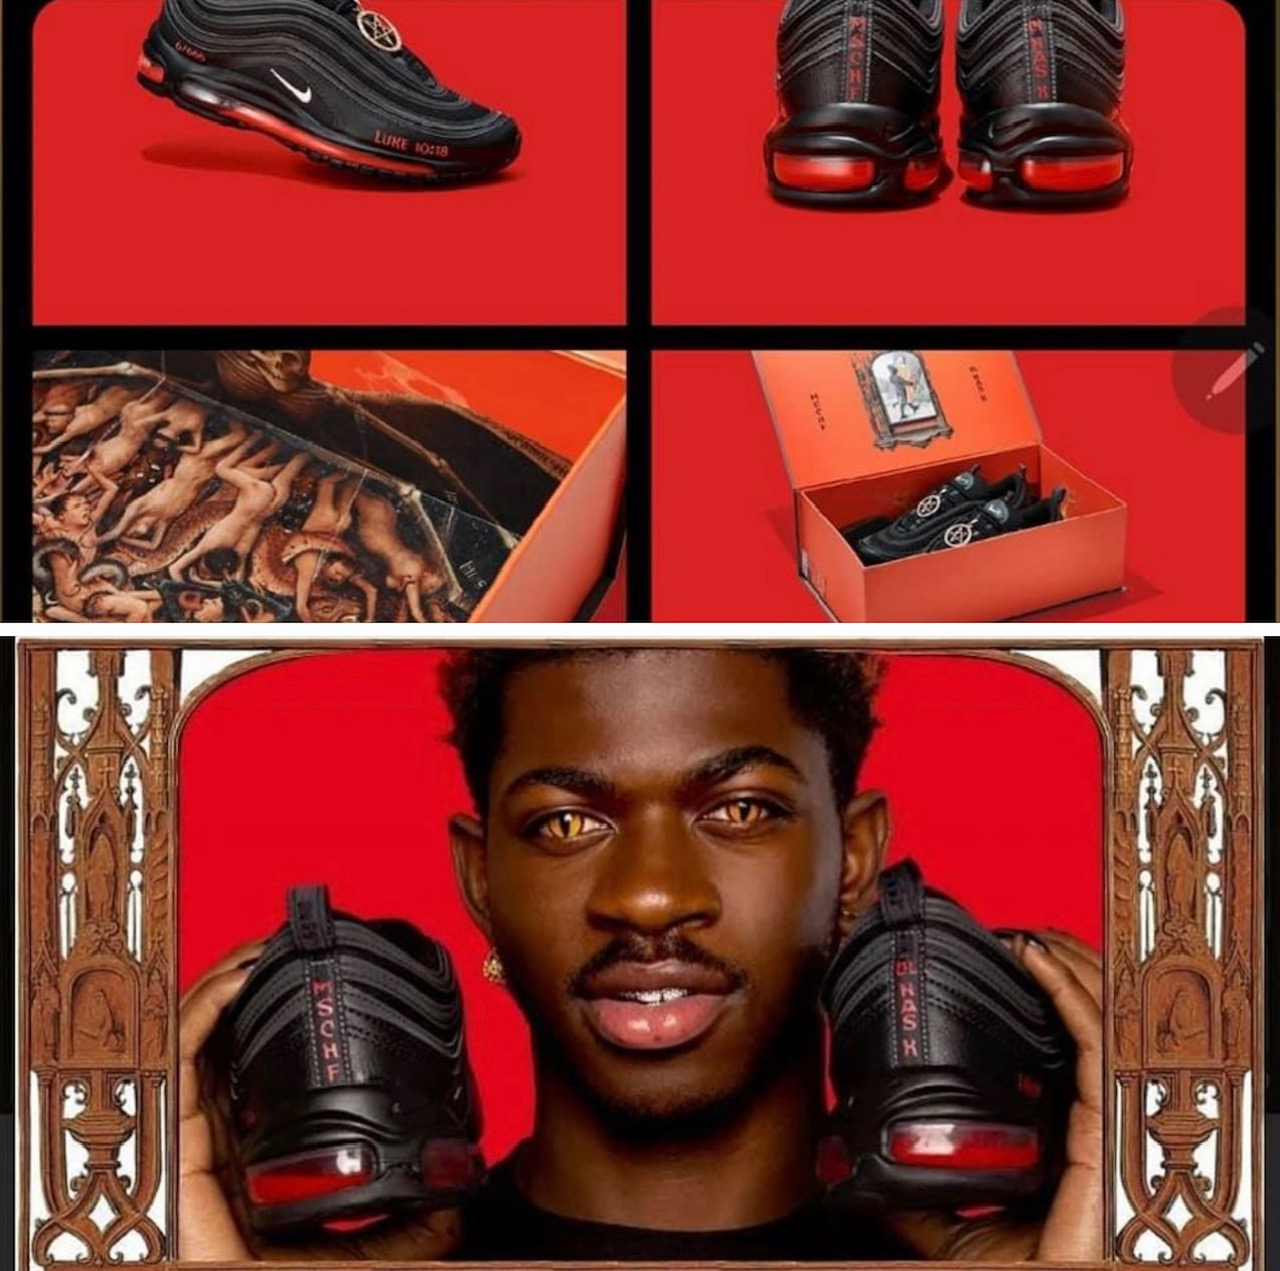 Nike Sues Over 'Satan Shoes' Promoted By Lil Nas X - The New York Times